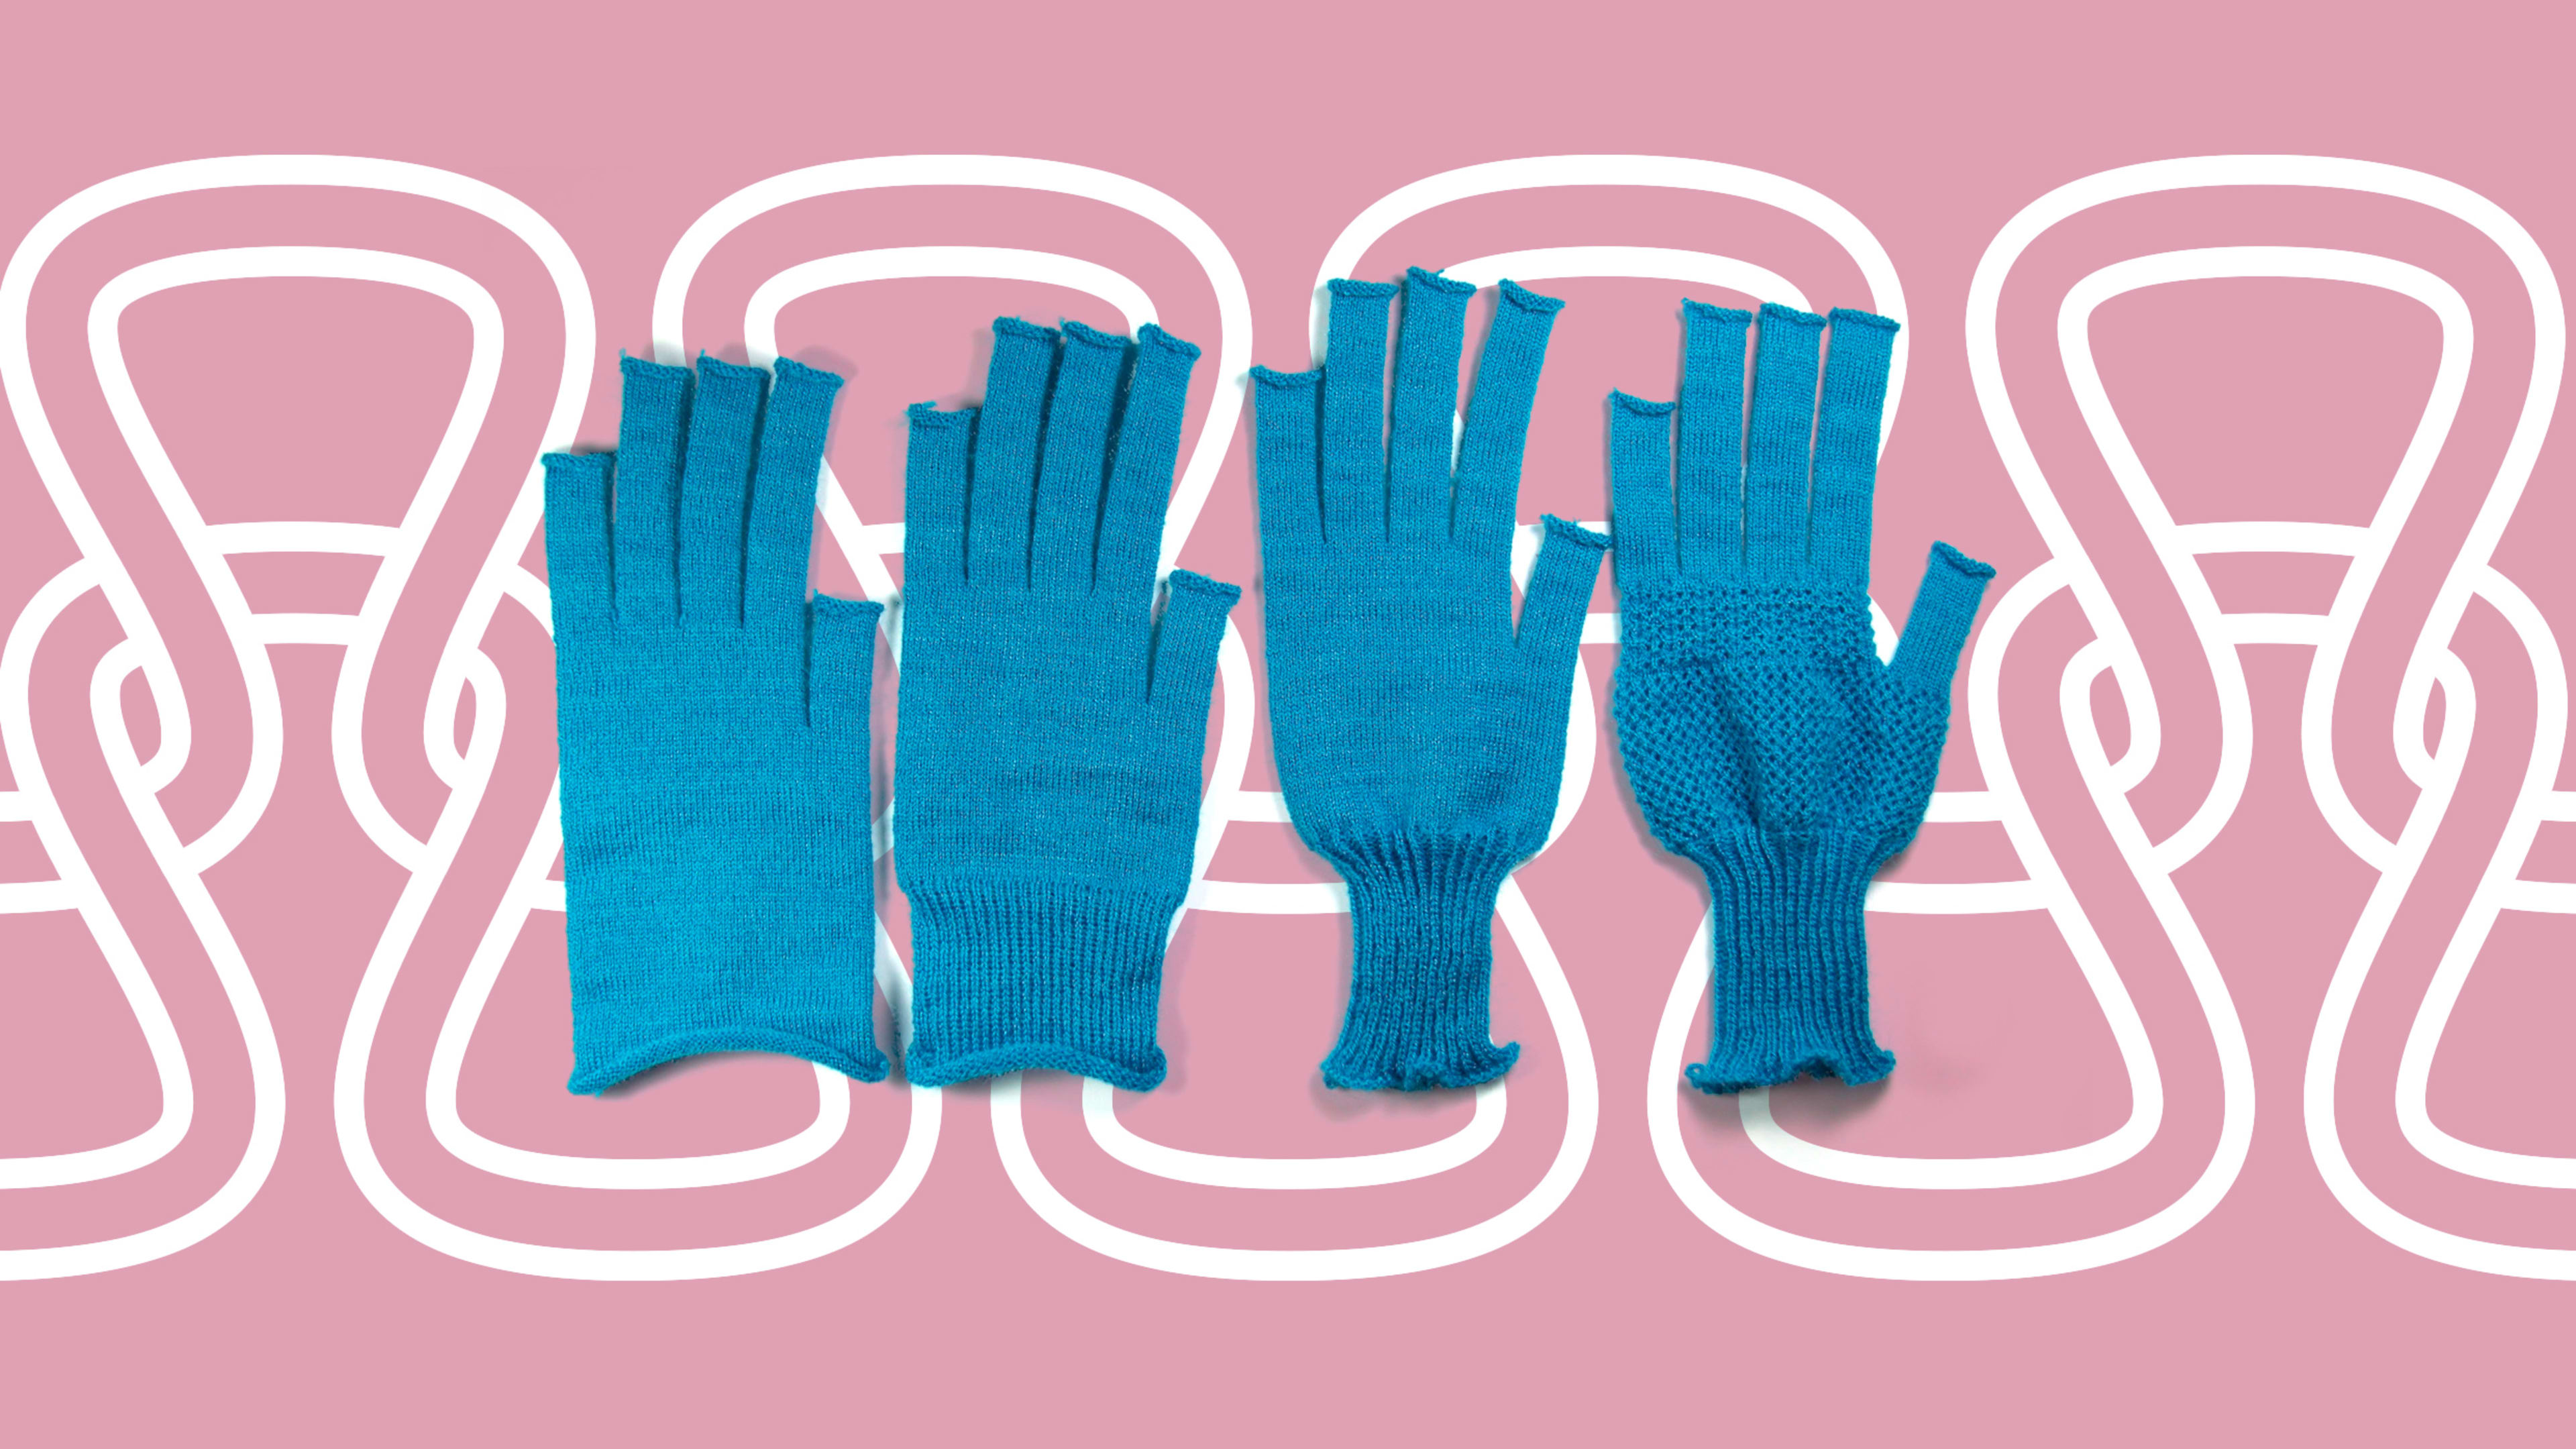 The wild, neural network-powered future of knitting